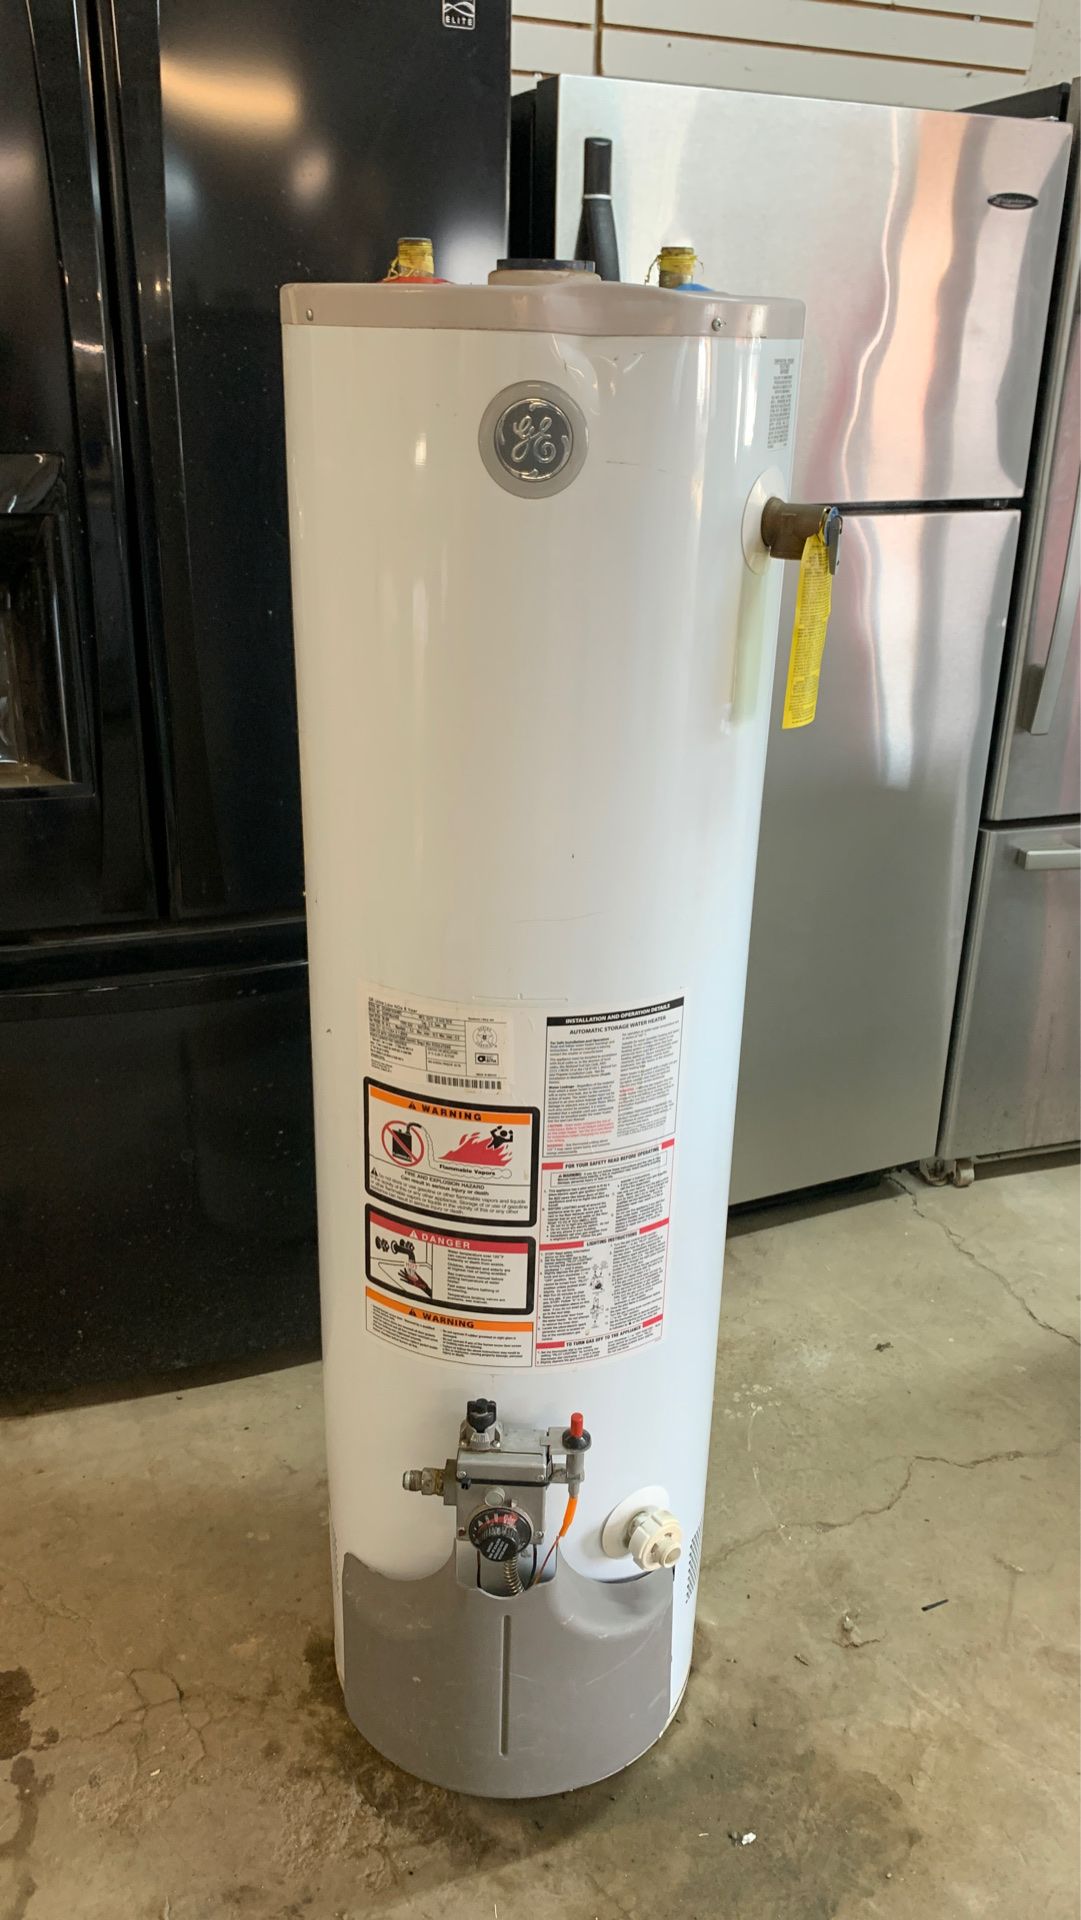 Nice used gas water heater 30 galon 2 month warranty cahs only 507 Ming Ave my address